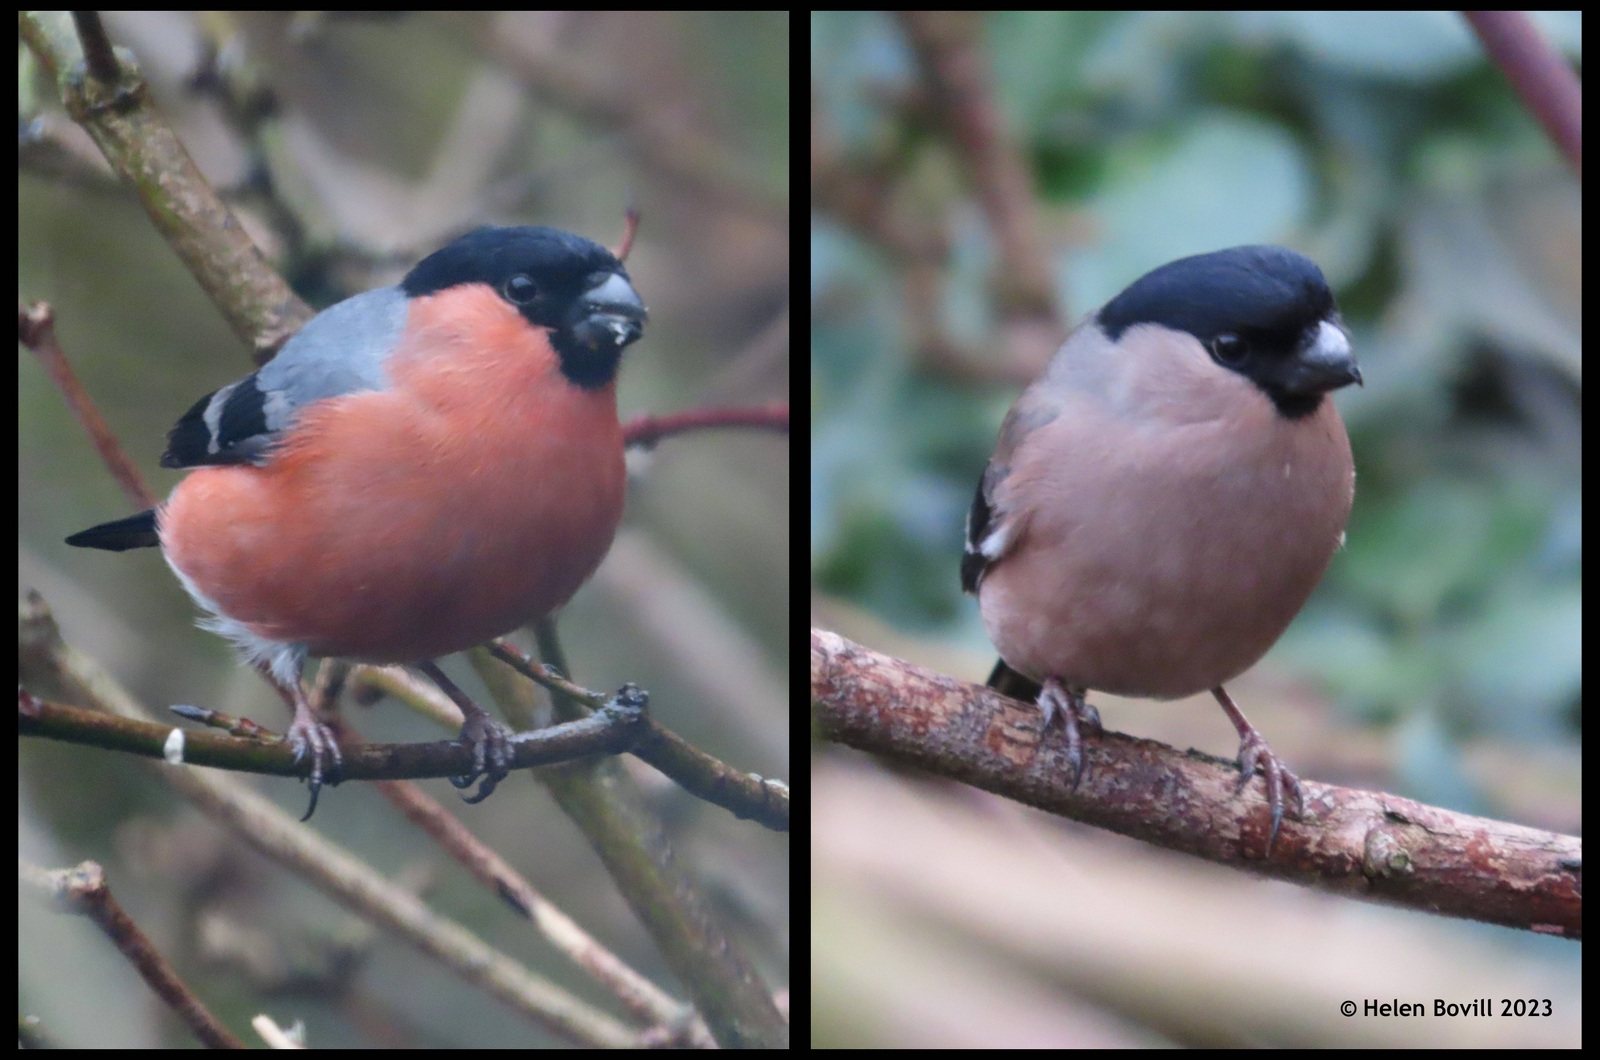 Two photos, one showing a male bullfinch and the other showing a female bullfinch, in the cemetery trees